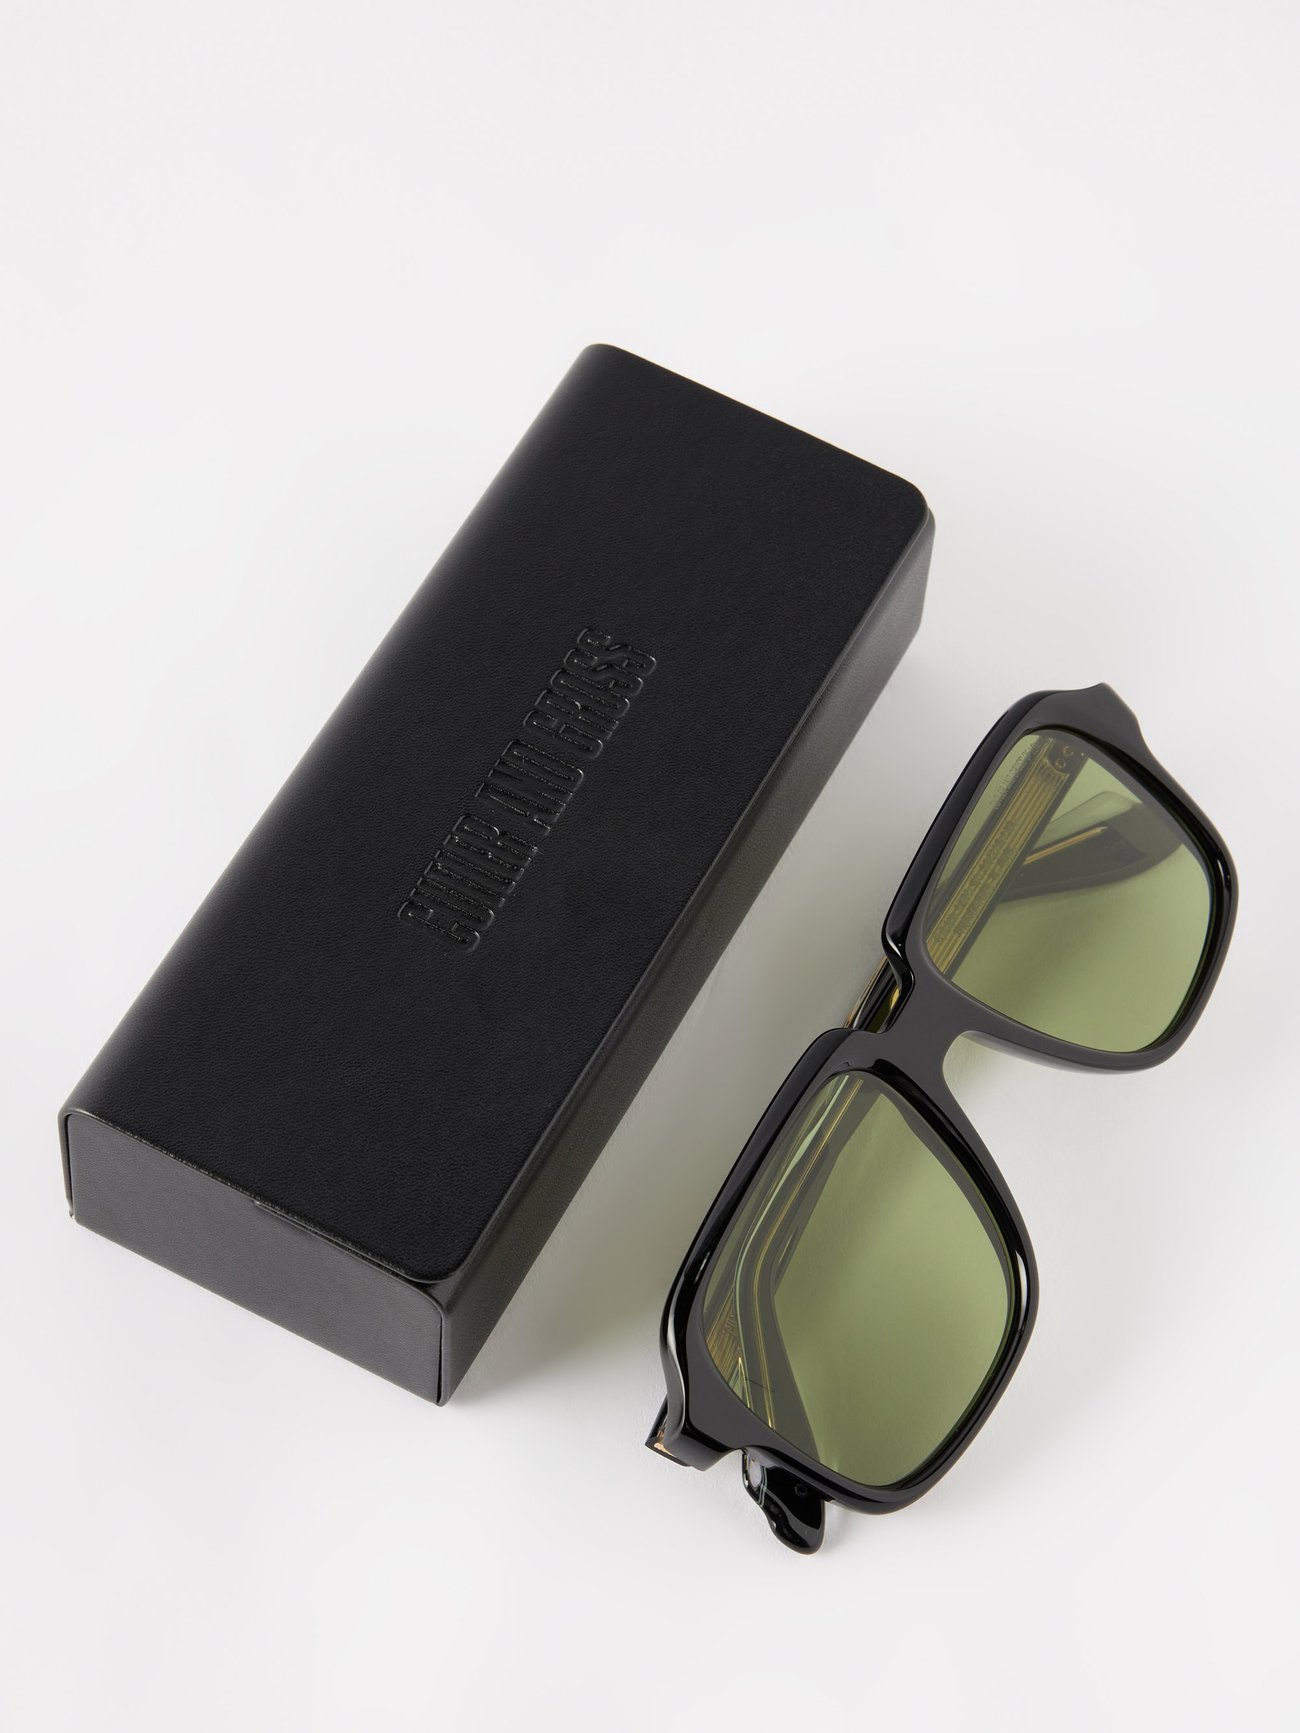 1349 Square Designer Sunglasses by Cutler and Gross